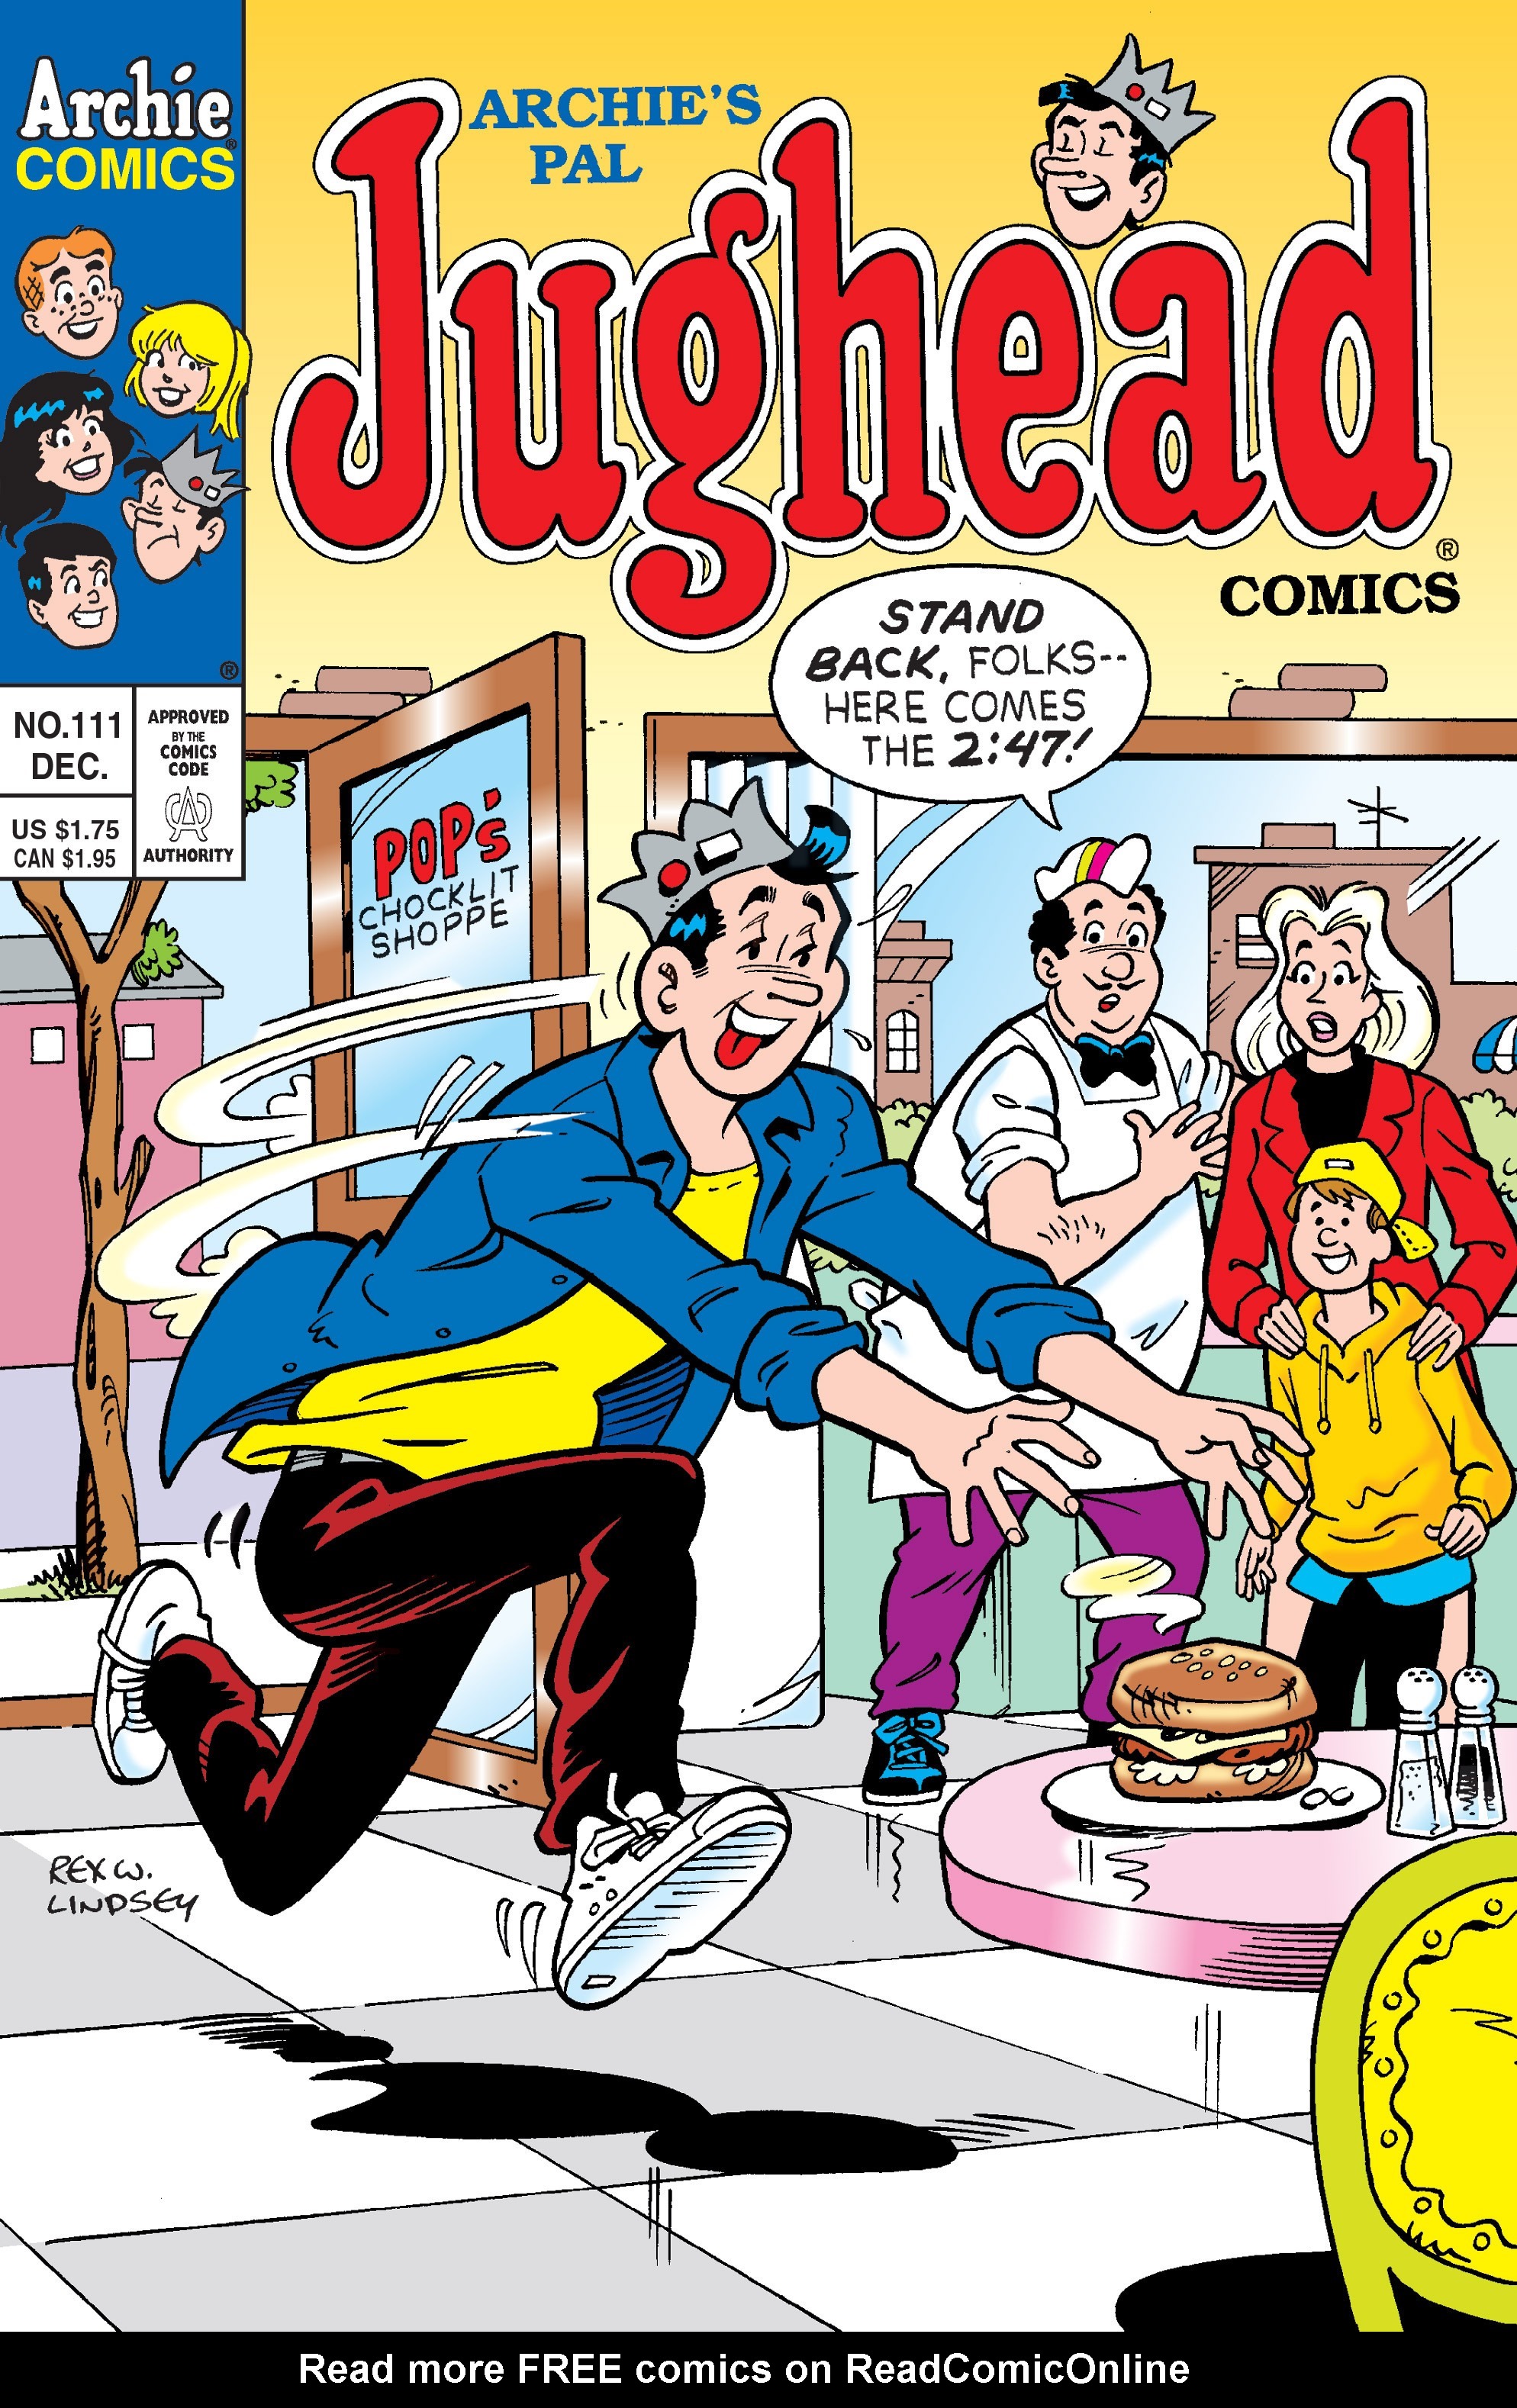 Archie S Pal Jughead Issue 111 | Read Archie S Pal Jughead Issue 111 comic  online in high quality. Read Full Comic online for free - Read comics  online in high quality .|viewcomiconline.com